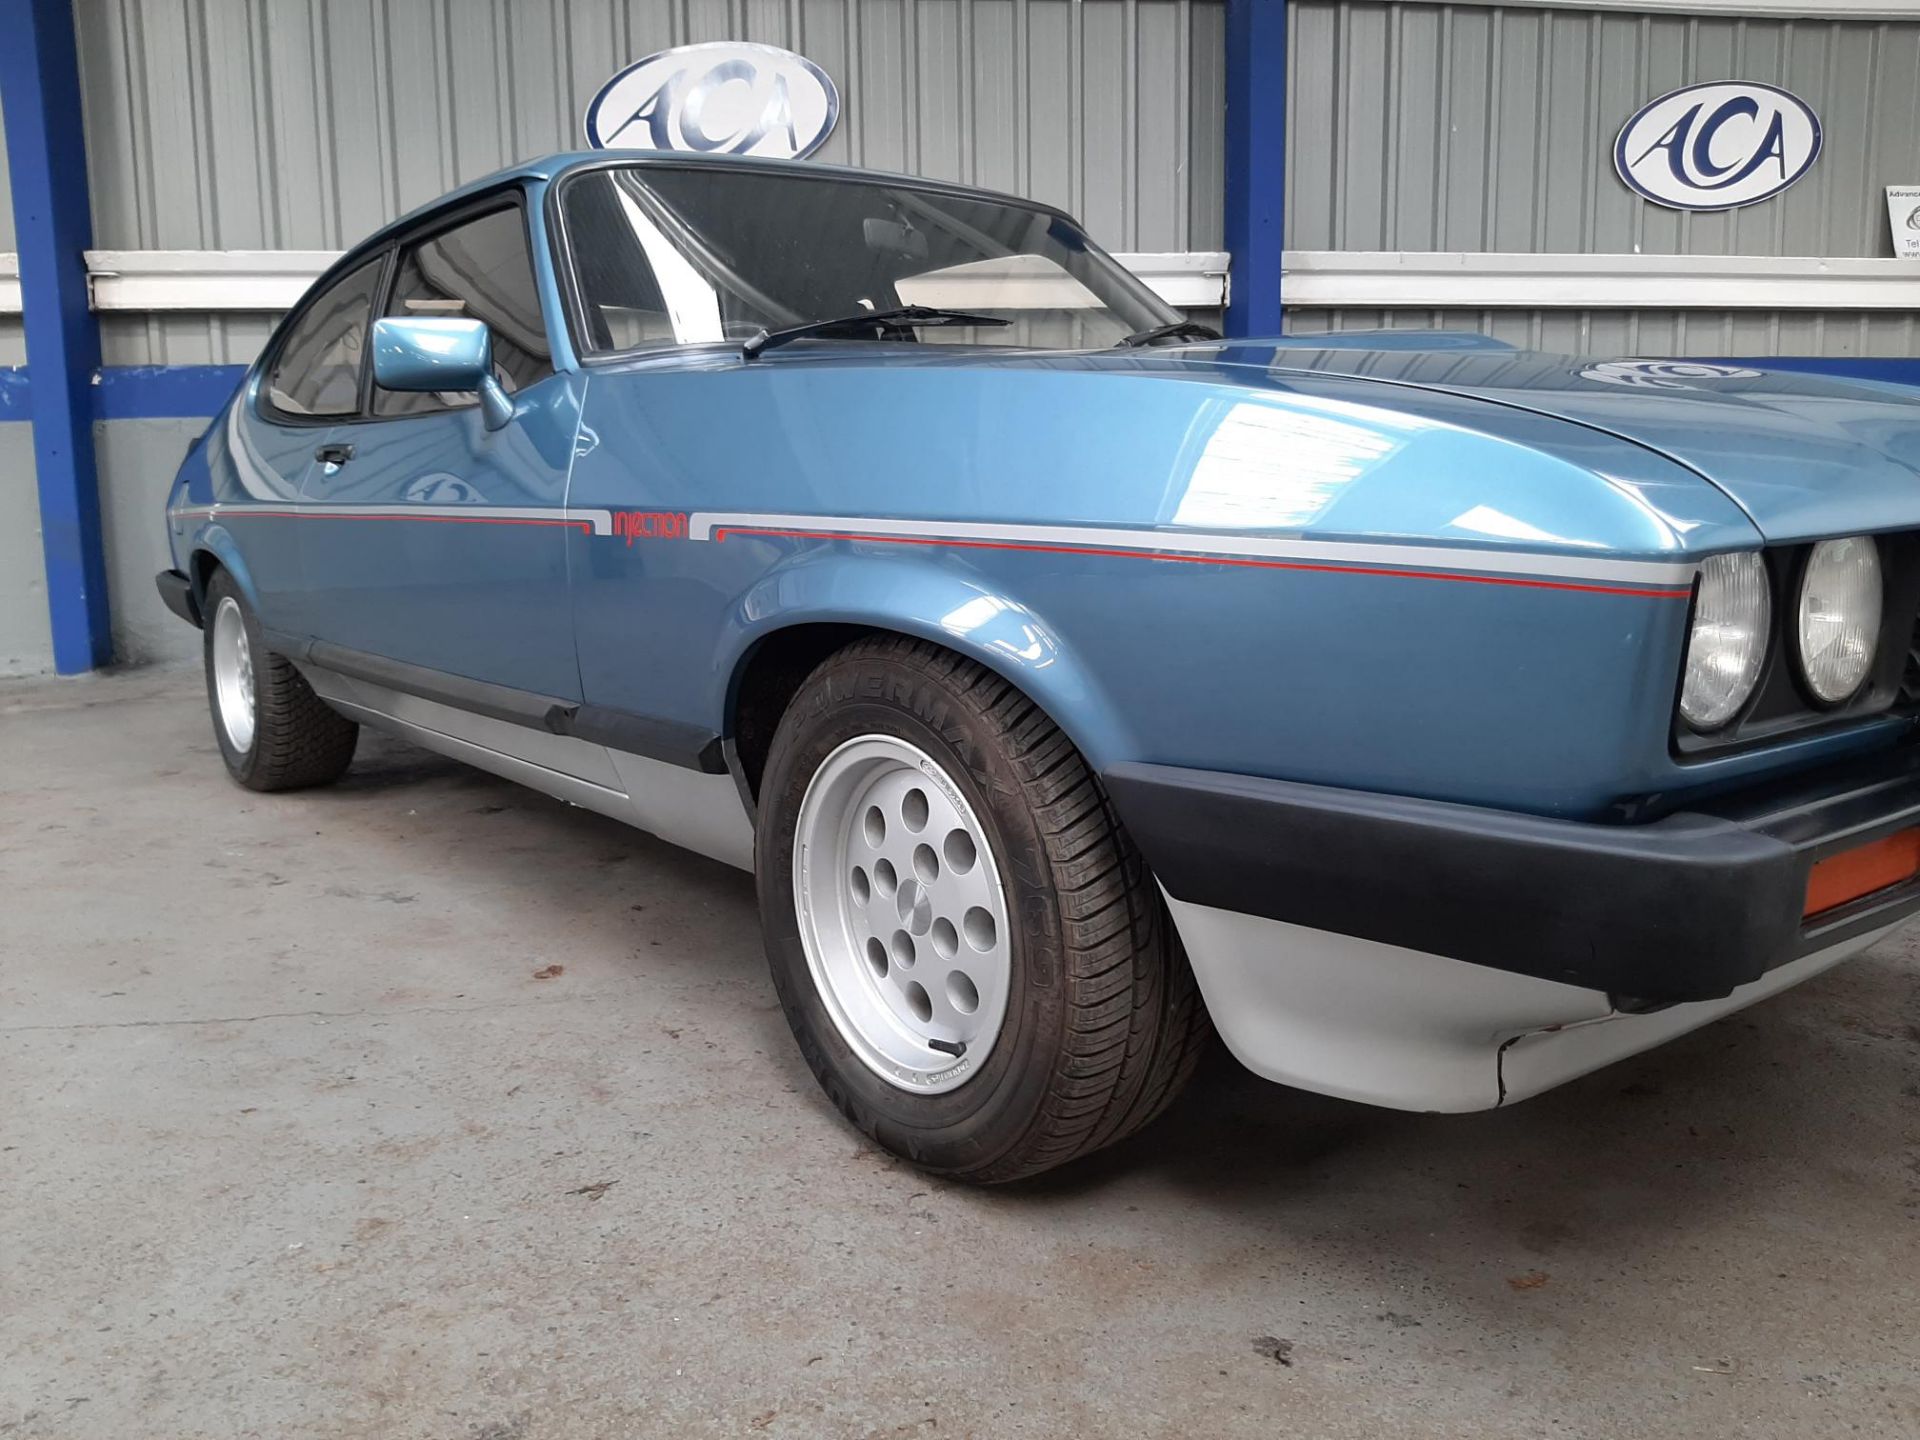 1982 Ford Capri 2.8 Injection - Image 21 of 23